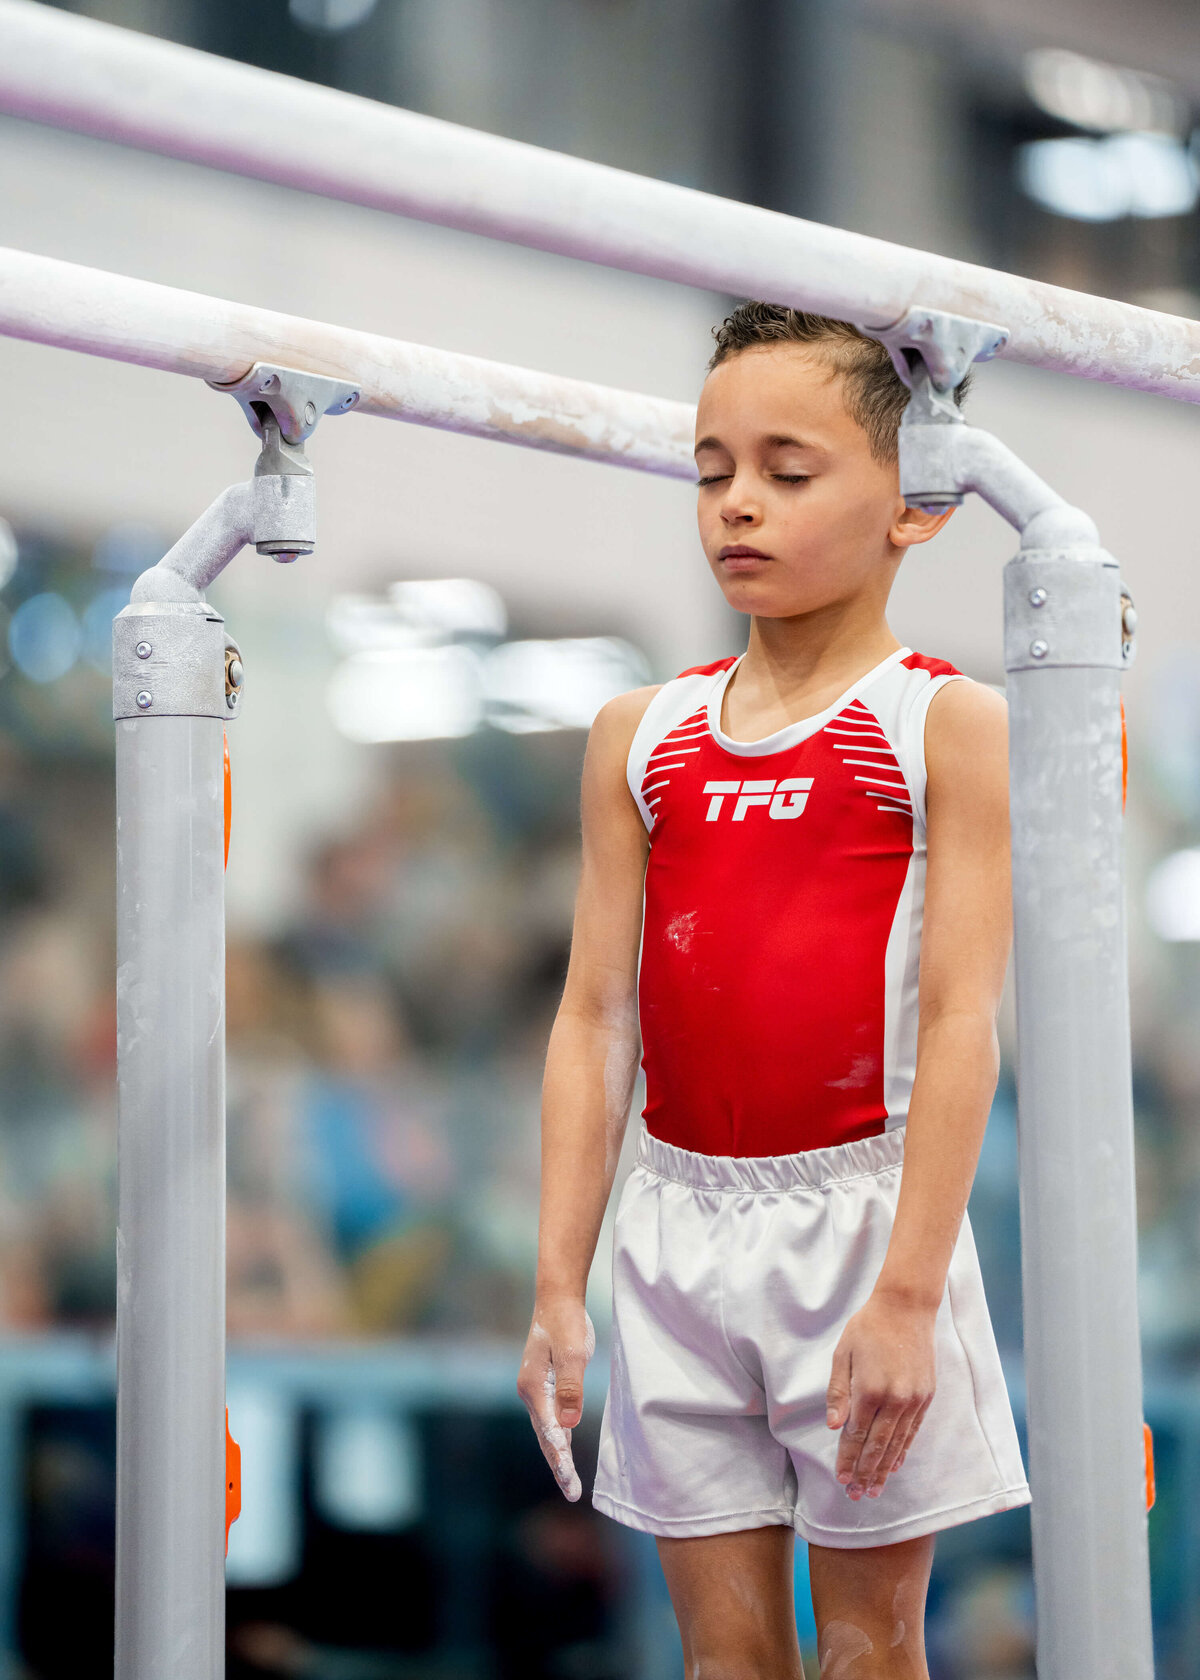 Photo by Luke O'Geil taken at the 2023 inaugural Grizzly Classic men's artistic gymnastics competitionA1_06336